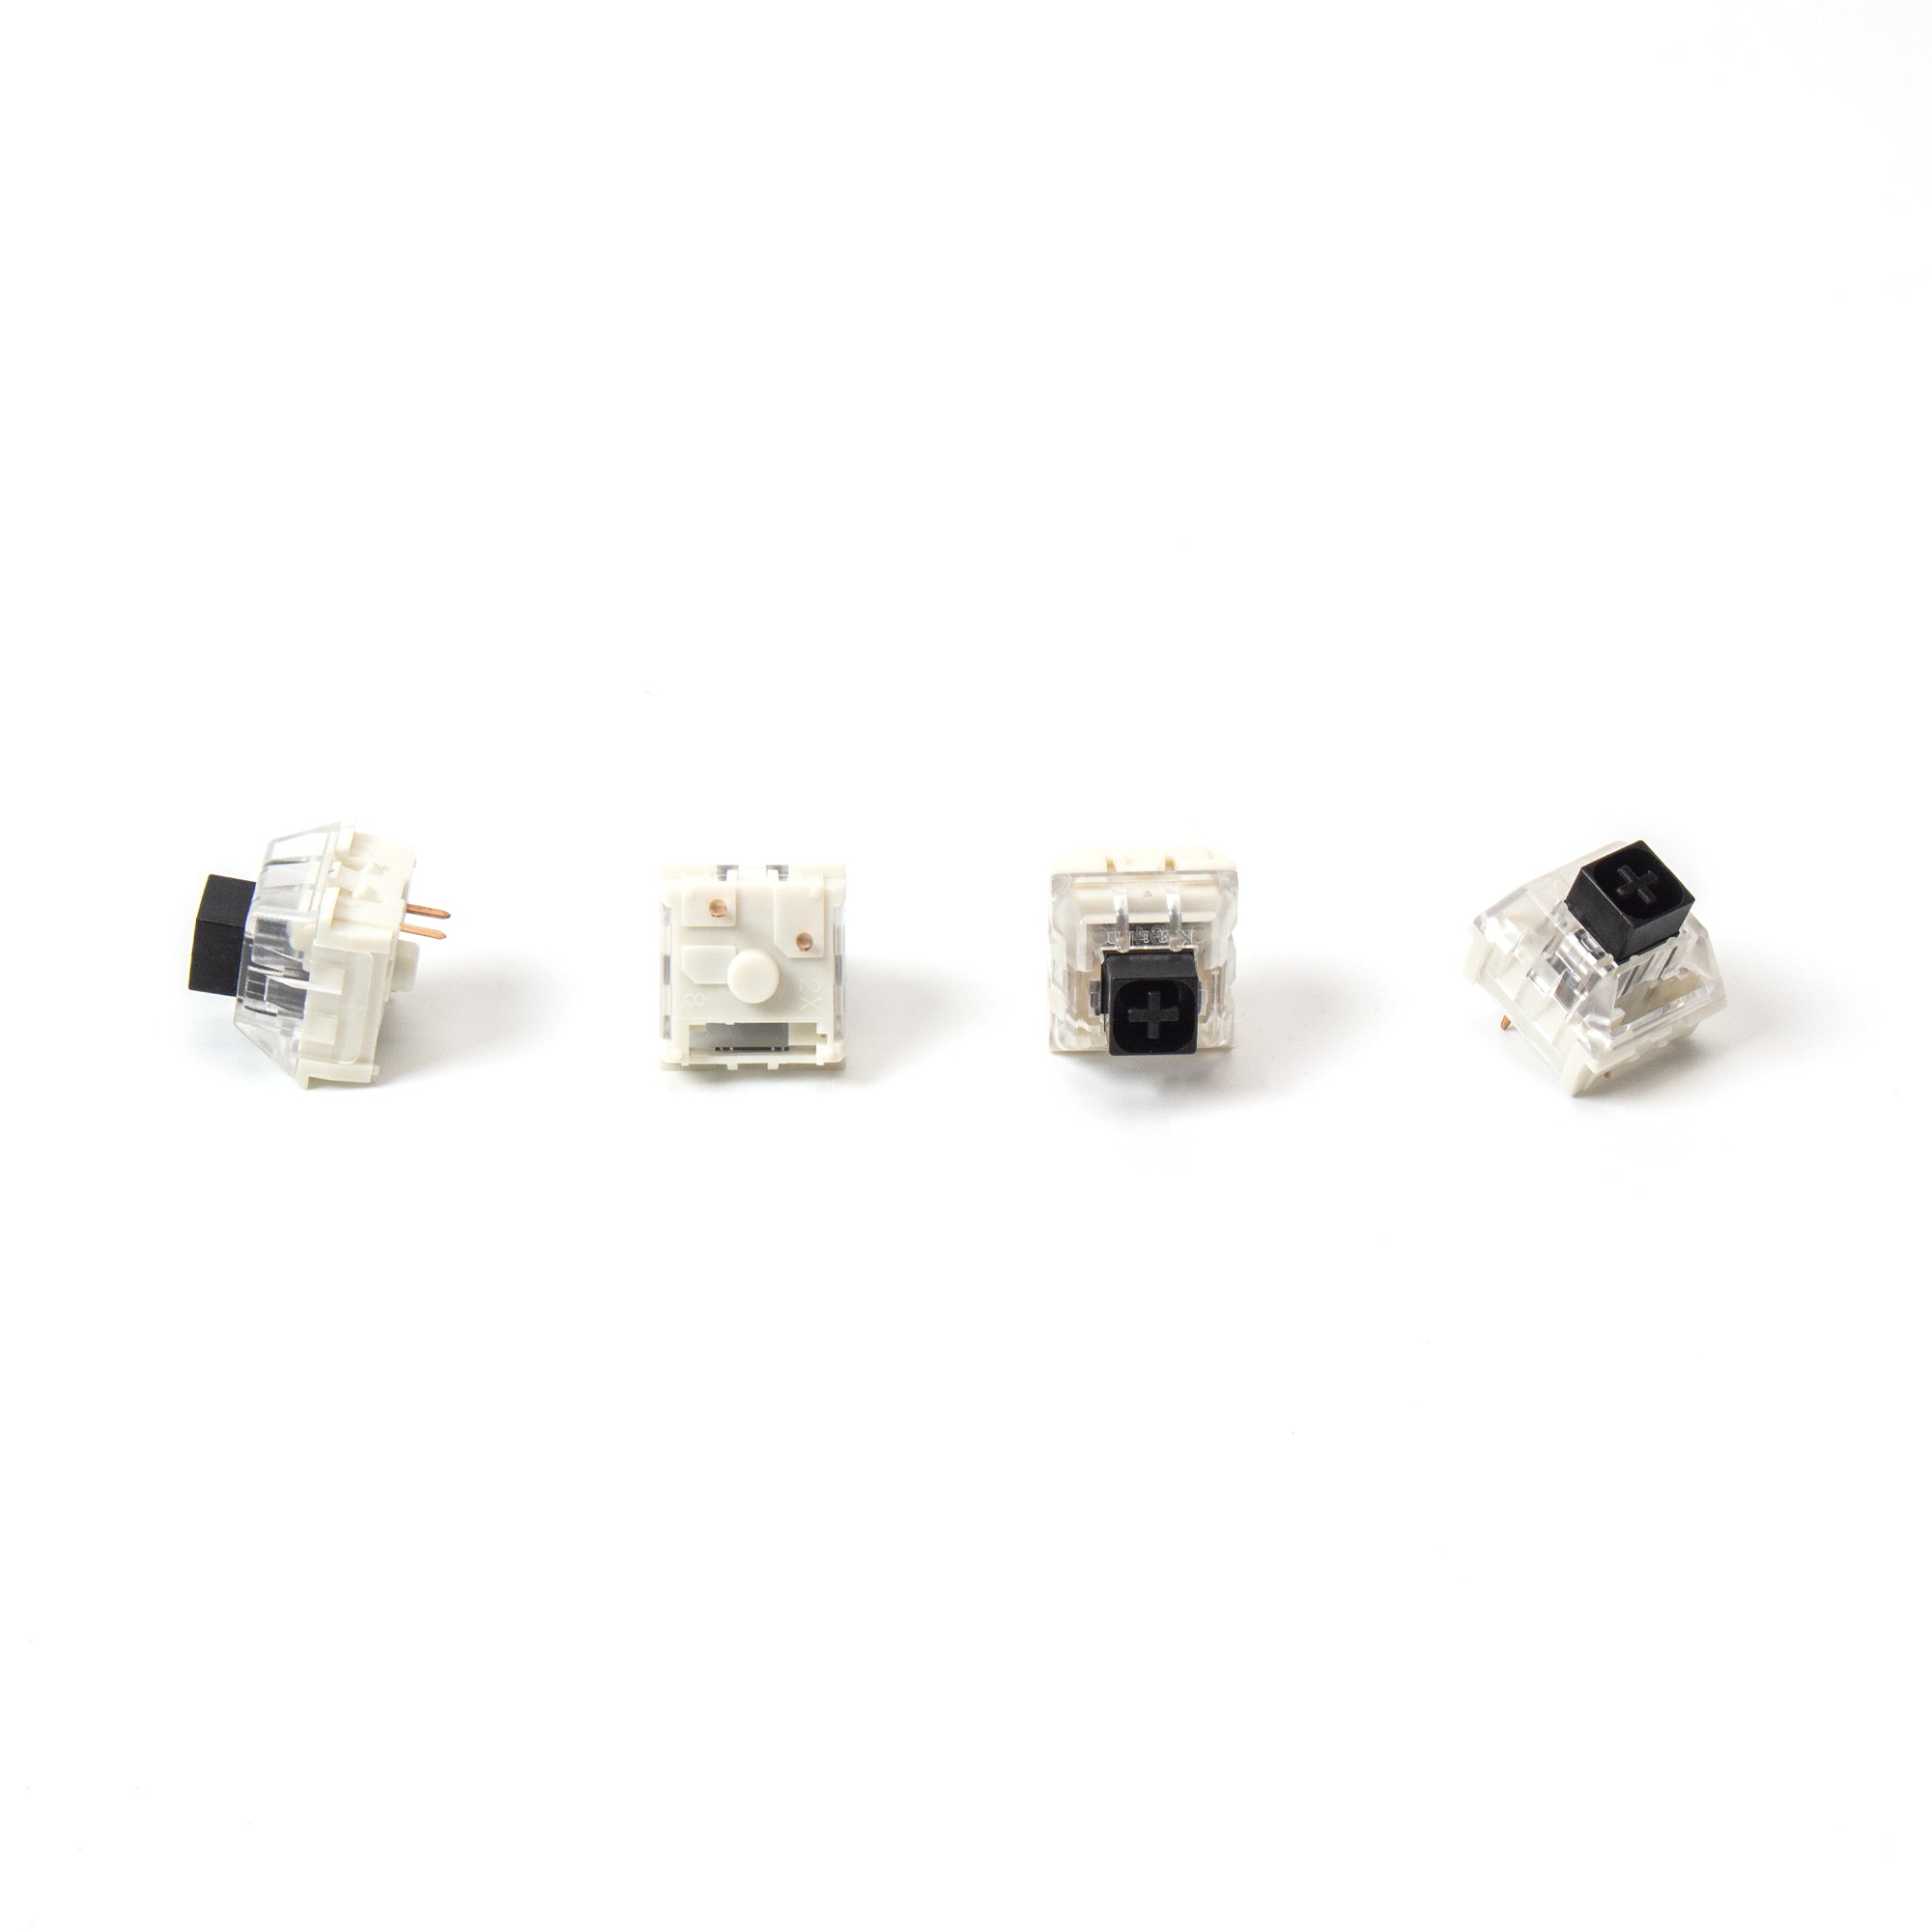 Kailh Box Switch Set – Kailh switch